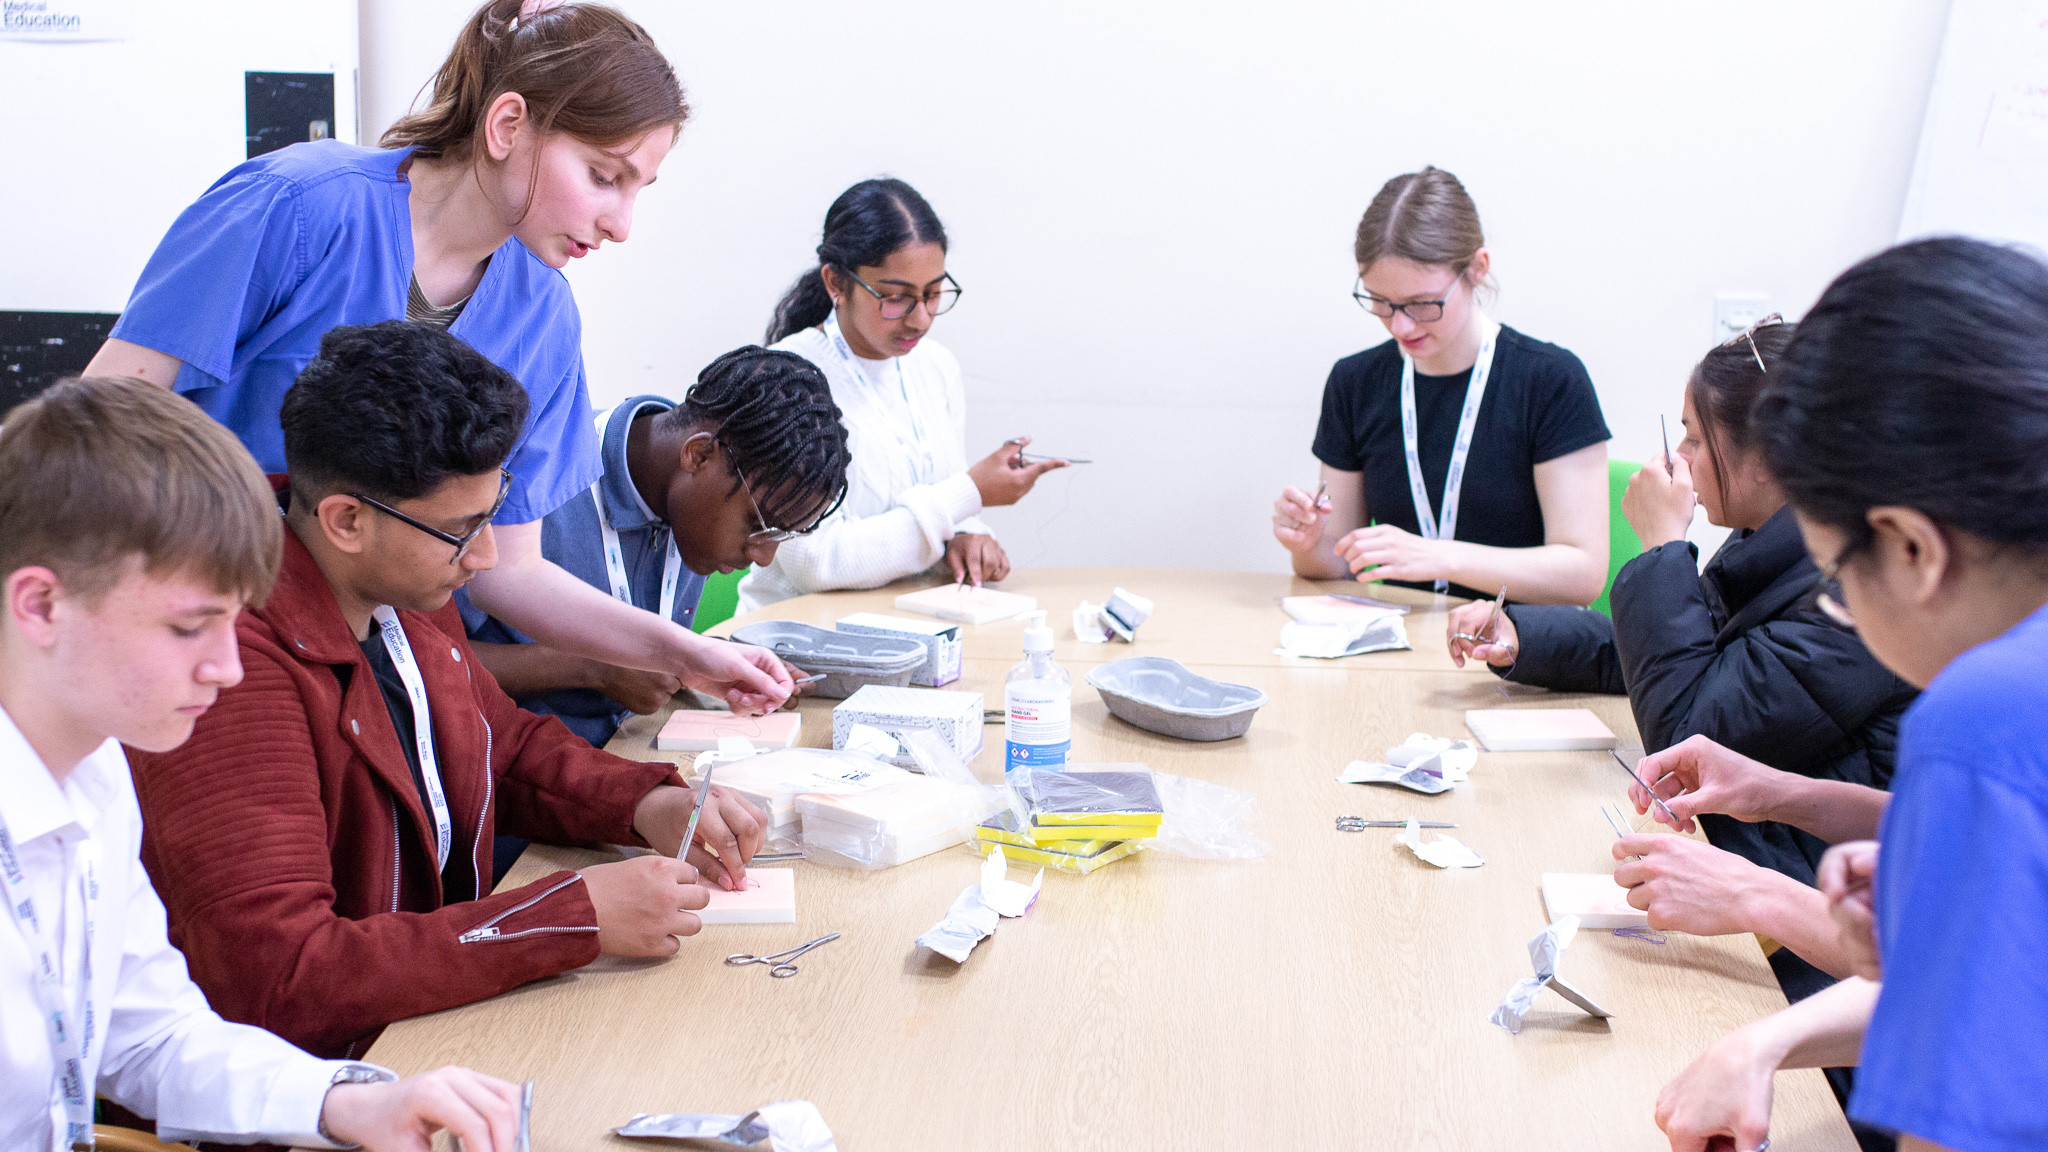 Students practising suturing at the MedStart4U taster day. Image shows seven sixth formers sitting at a table using instruments to practise suturing, as a medical student in blue scrubs watches on